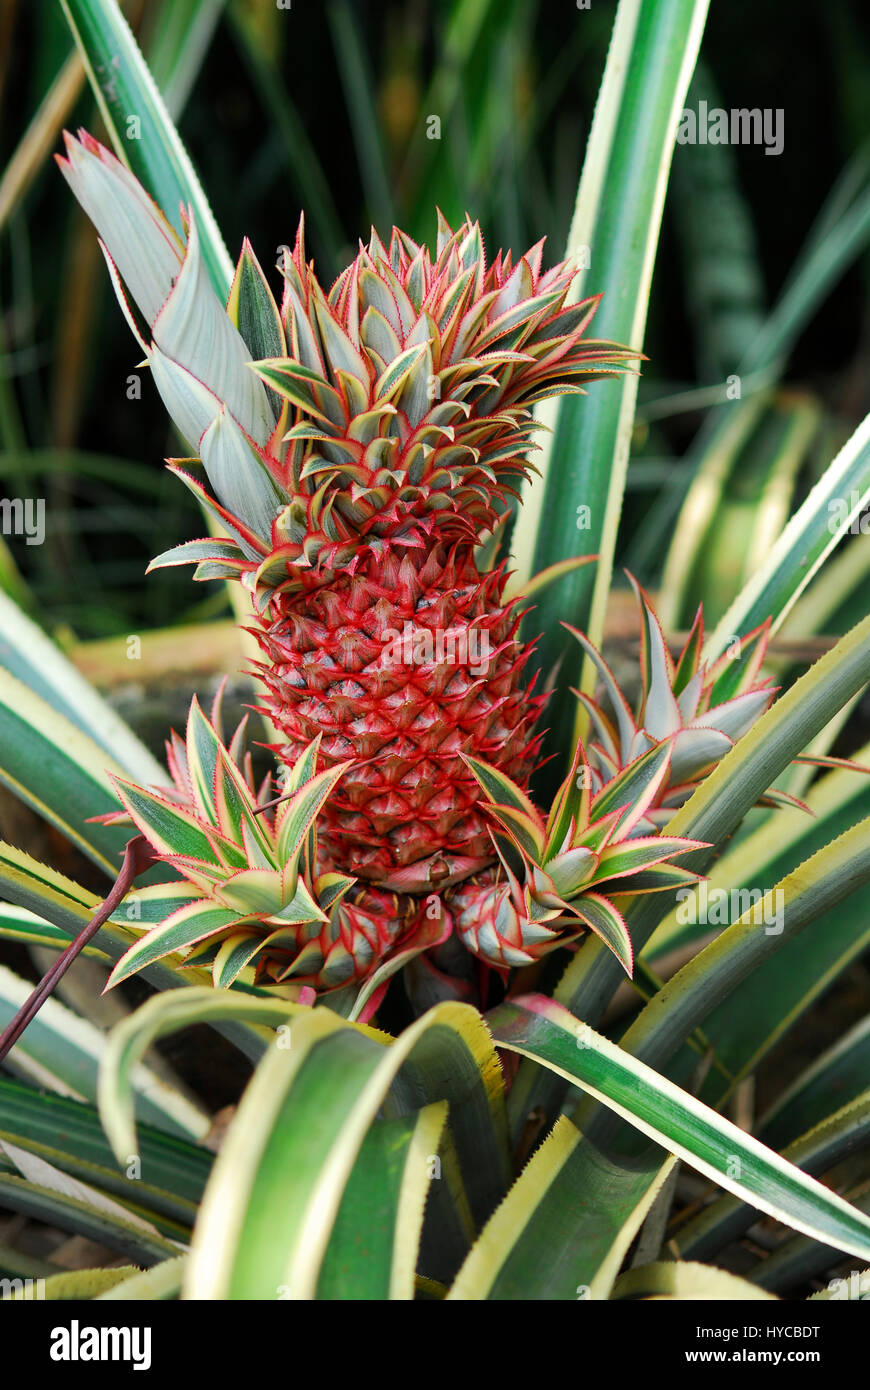 Red skin pineapple ananas growing out of its green leaved tree on a plantation in the morning used for commercial sale. Stock Photo